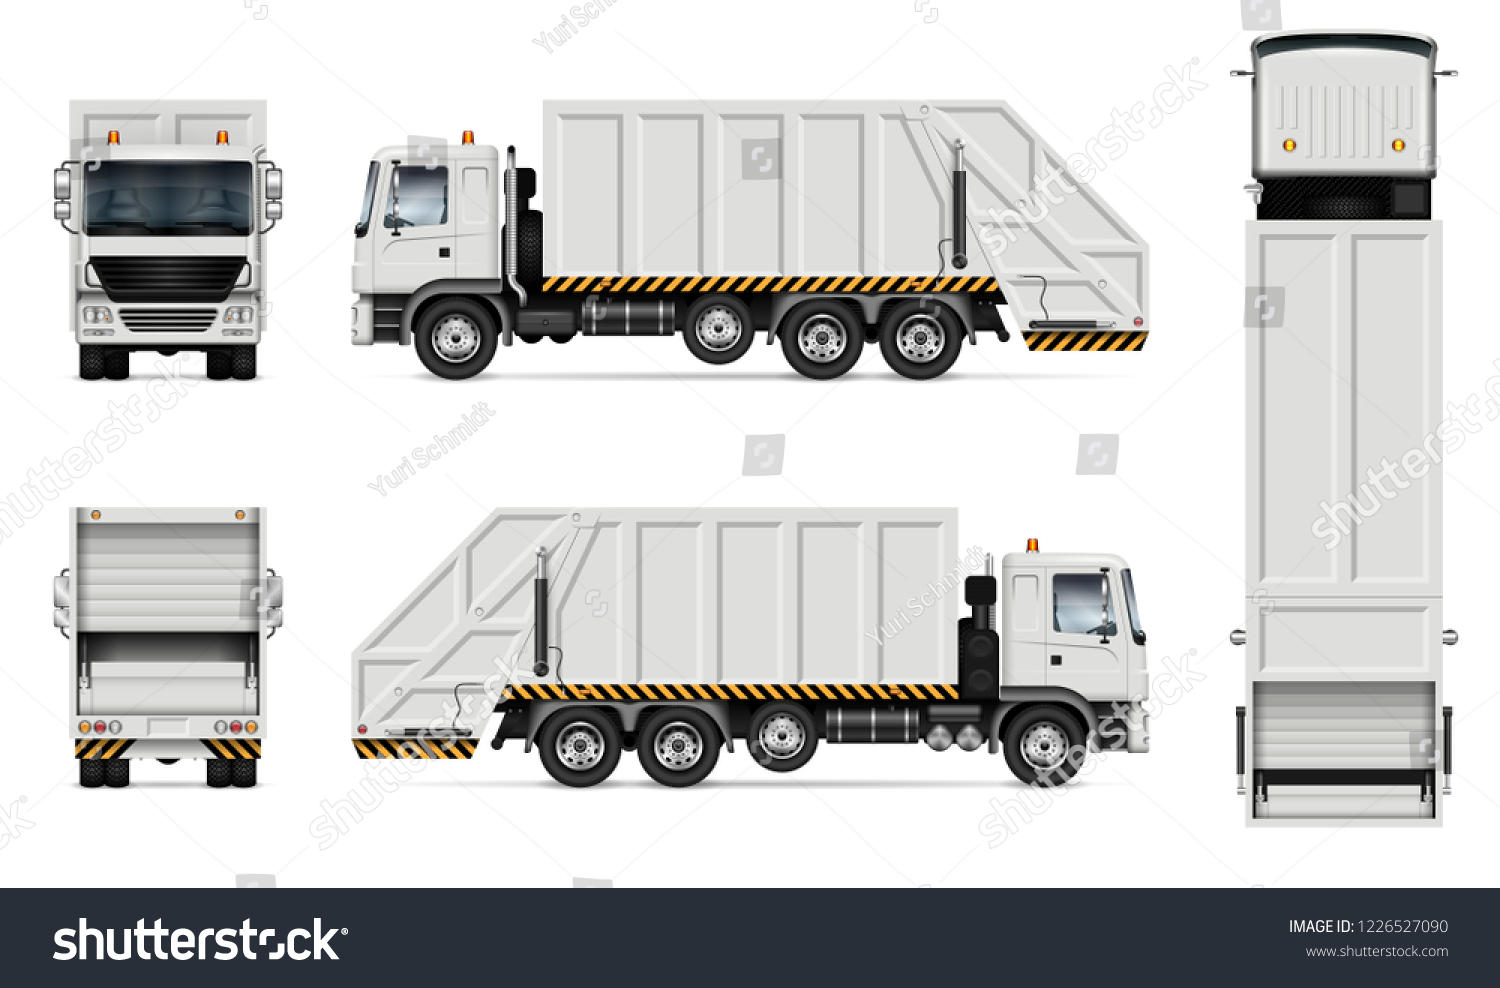 SVG of Realistic white garbage truck vector mockup. Isolated template of dump lorry on white background for vehicle branding, corporate identity. View from right side, easy to editing and recolor. svg